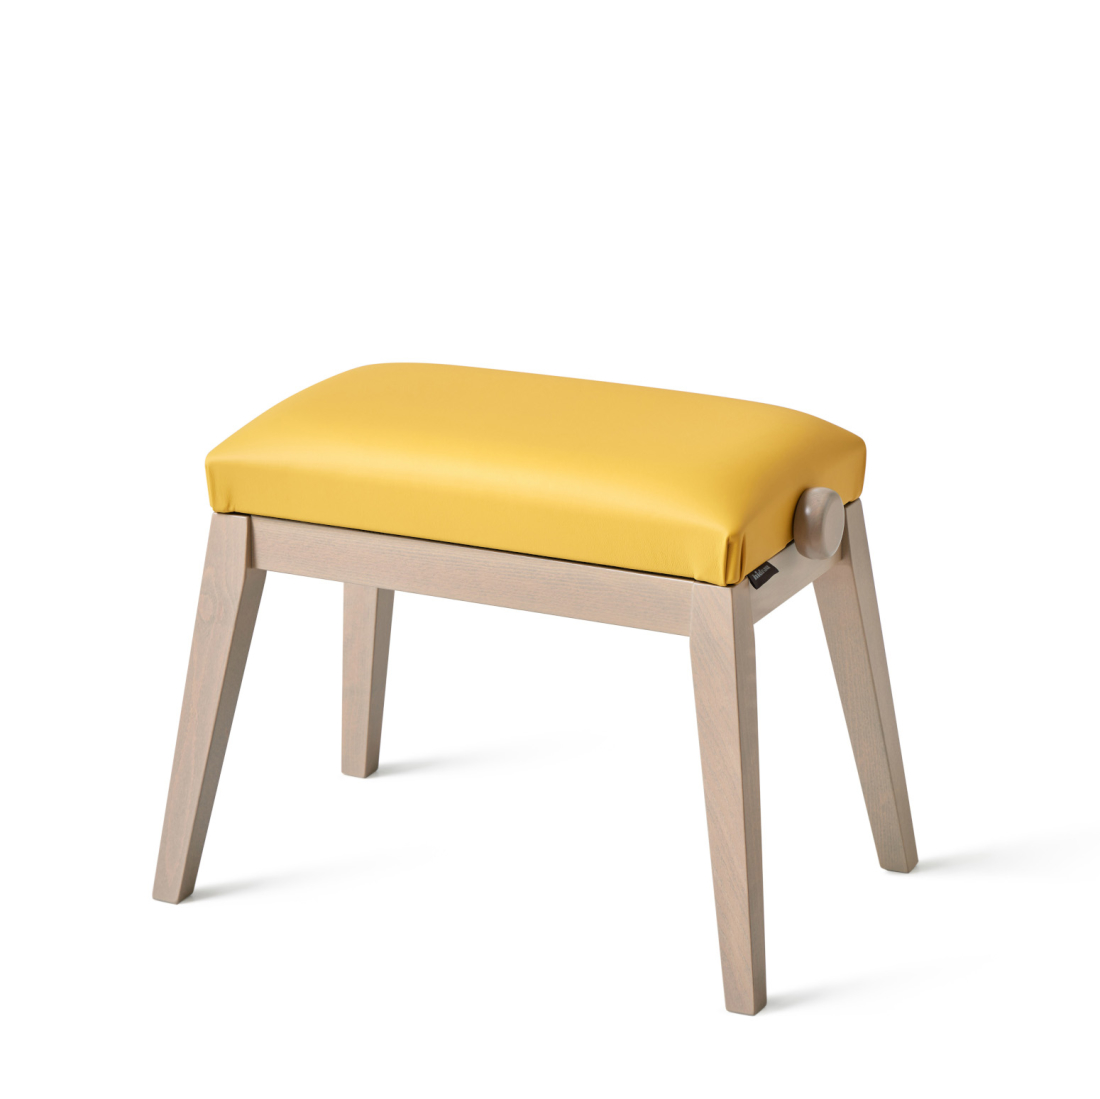 Beech Adjustable Height Piano Bench - Yellow Leatherette